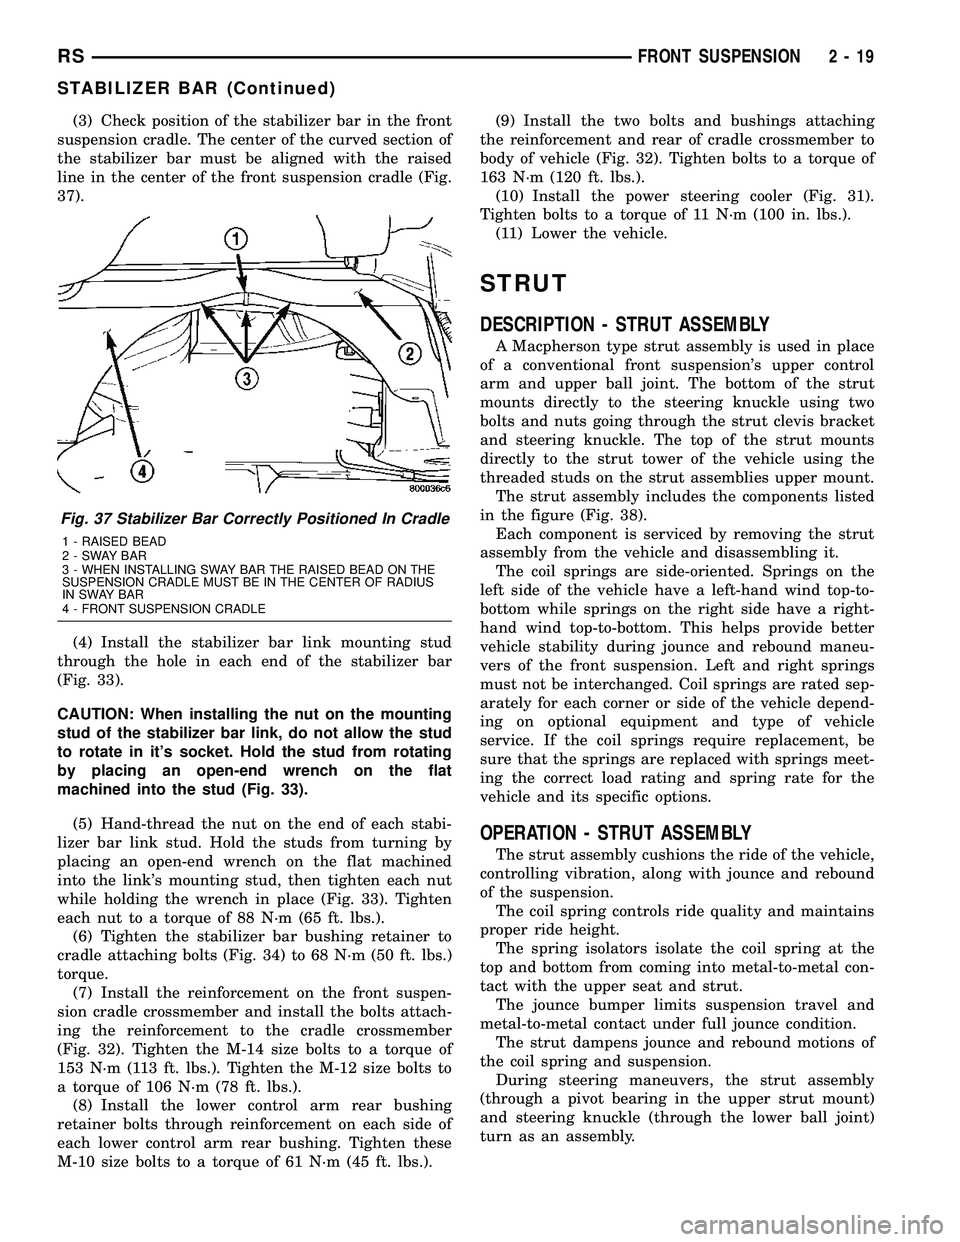 CHRYSLER CARAVAN 2005  Service Manual (3) Check position of the stabilizer bar in the front
suspension cradle. The center of the curved section of
the stabilizer bar must be aligned with the raised
line in the center of the front suspensi